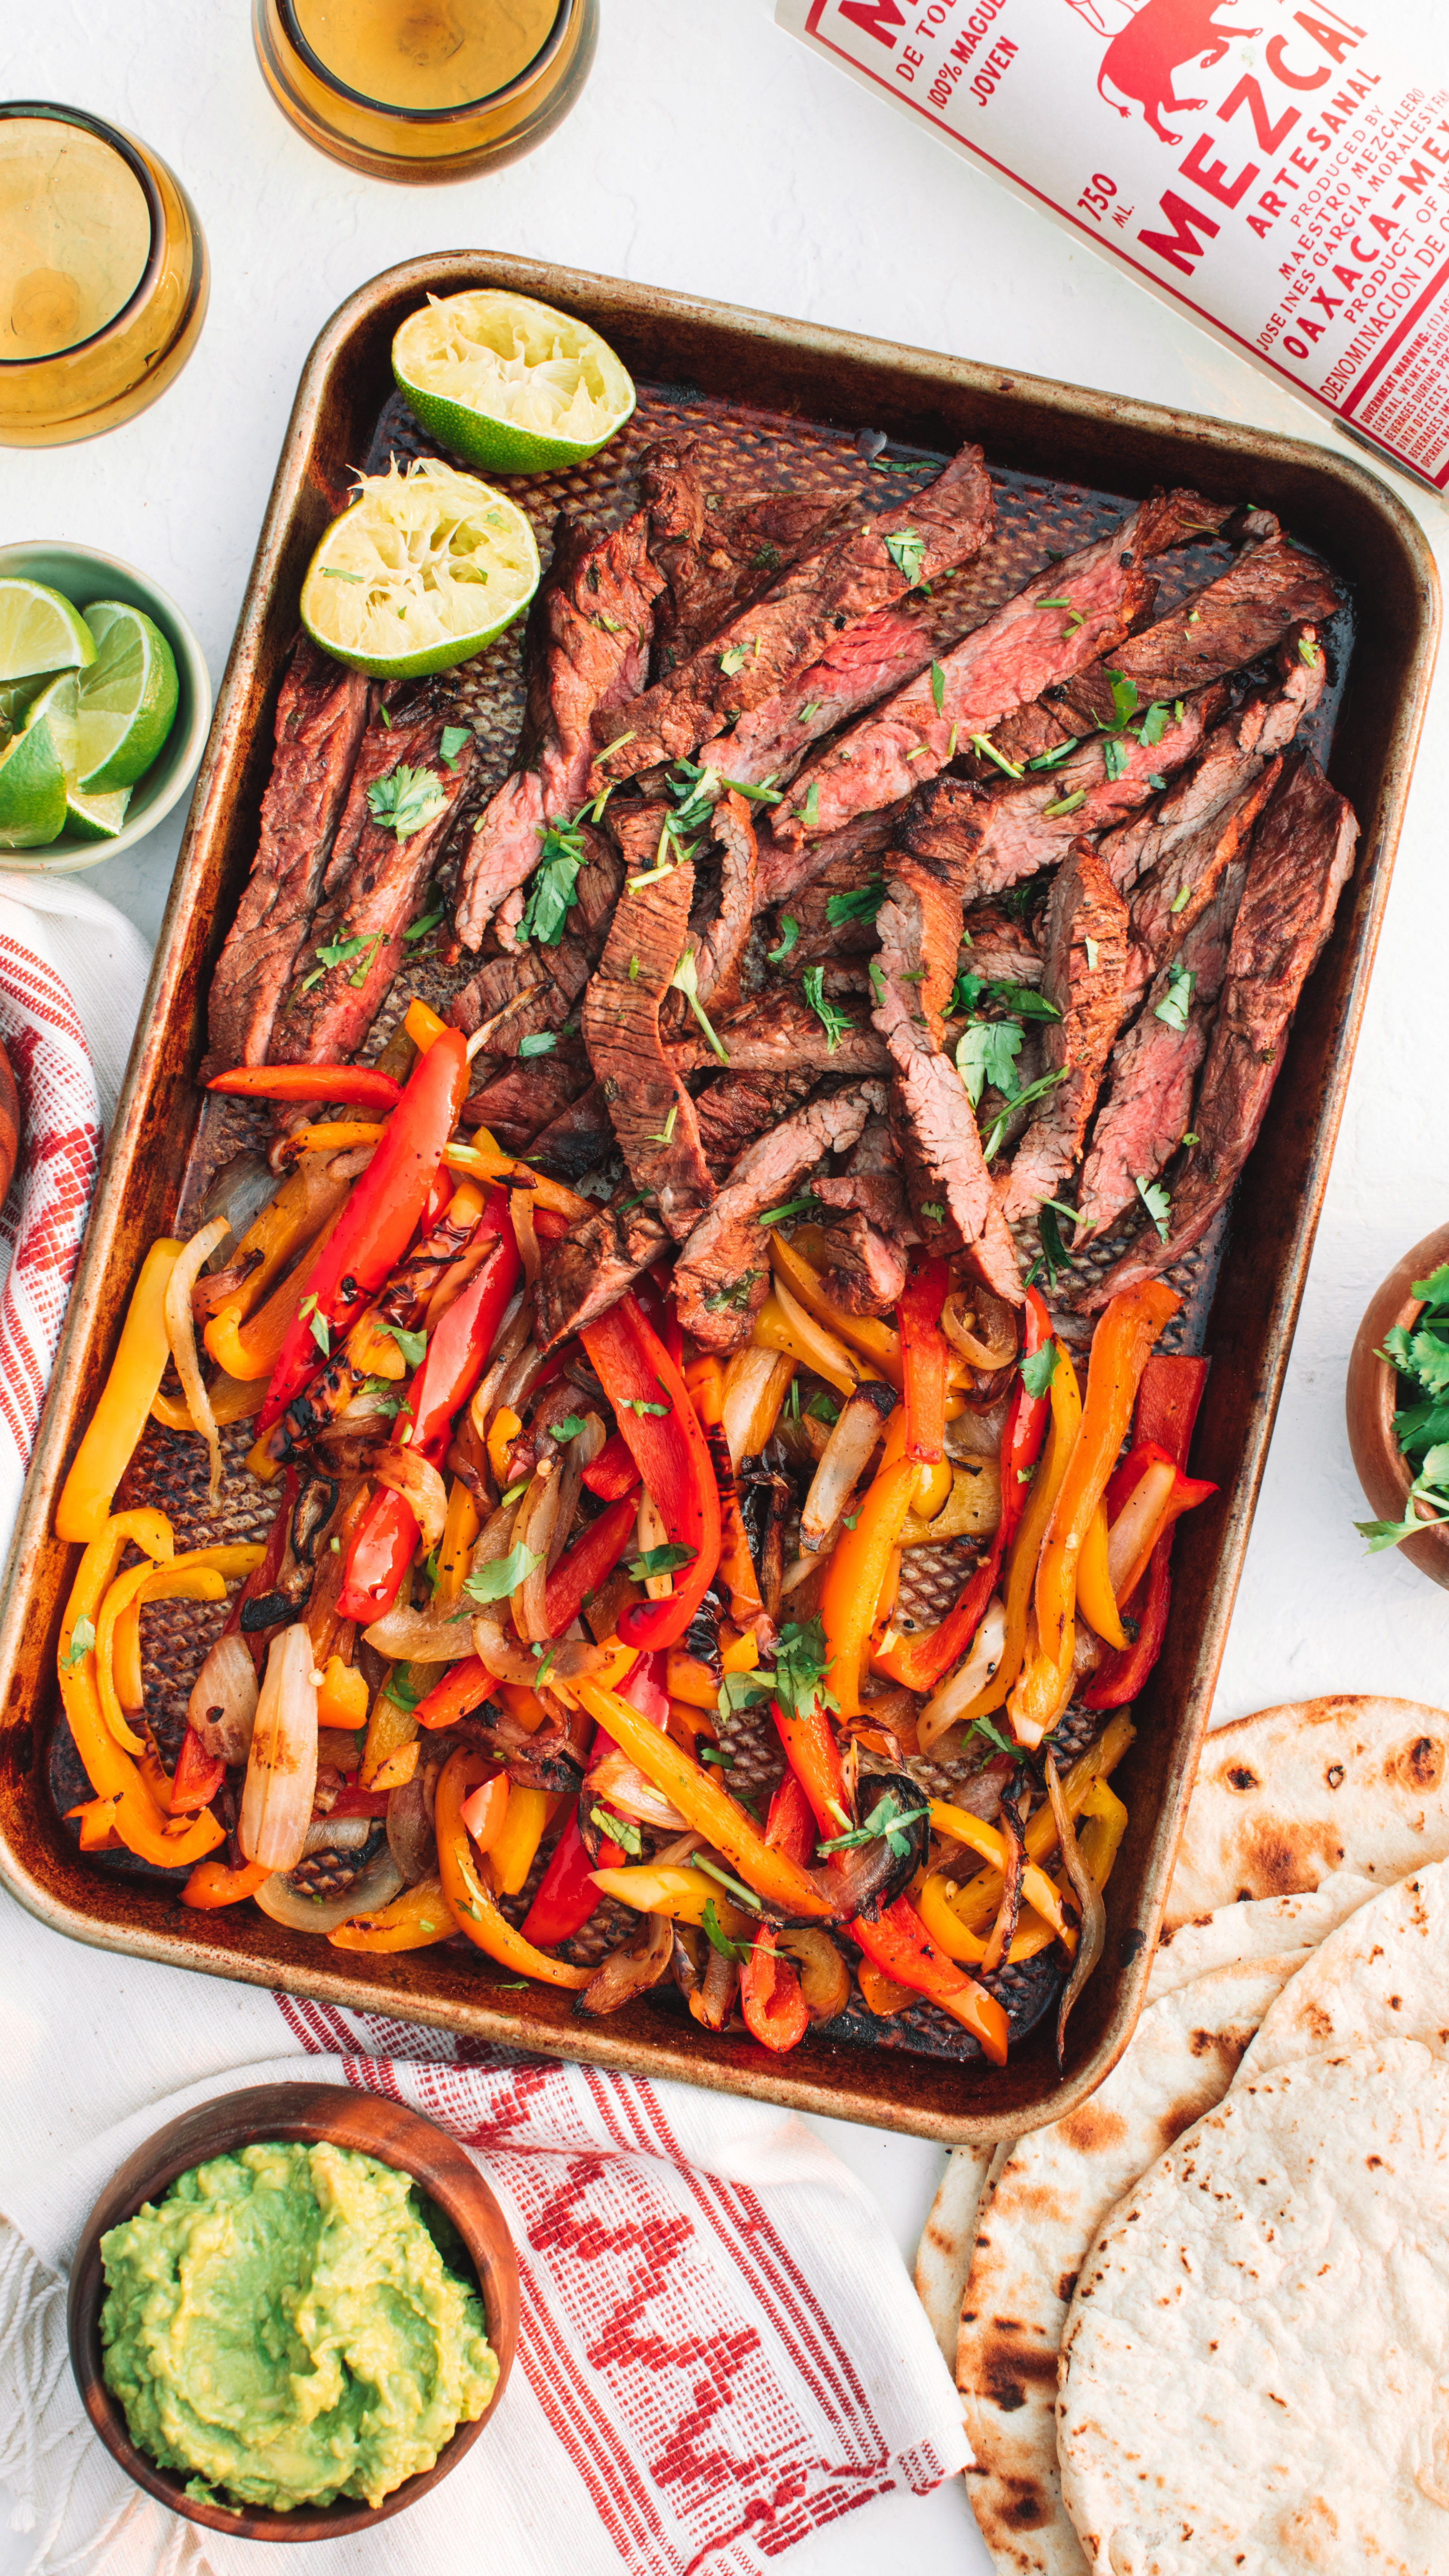 These Chipotle Mezcal steak fajitas are a late-summer hit: Try the recipe